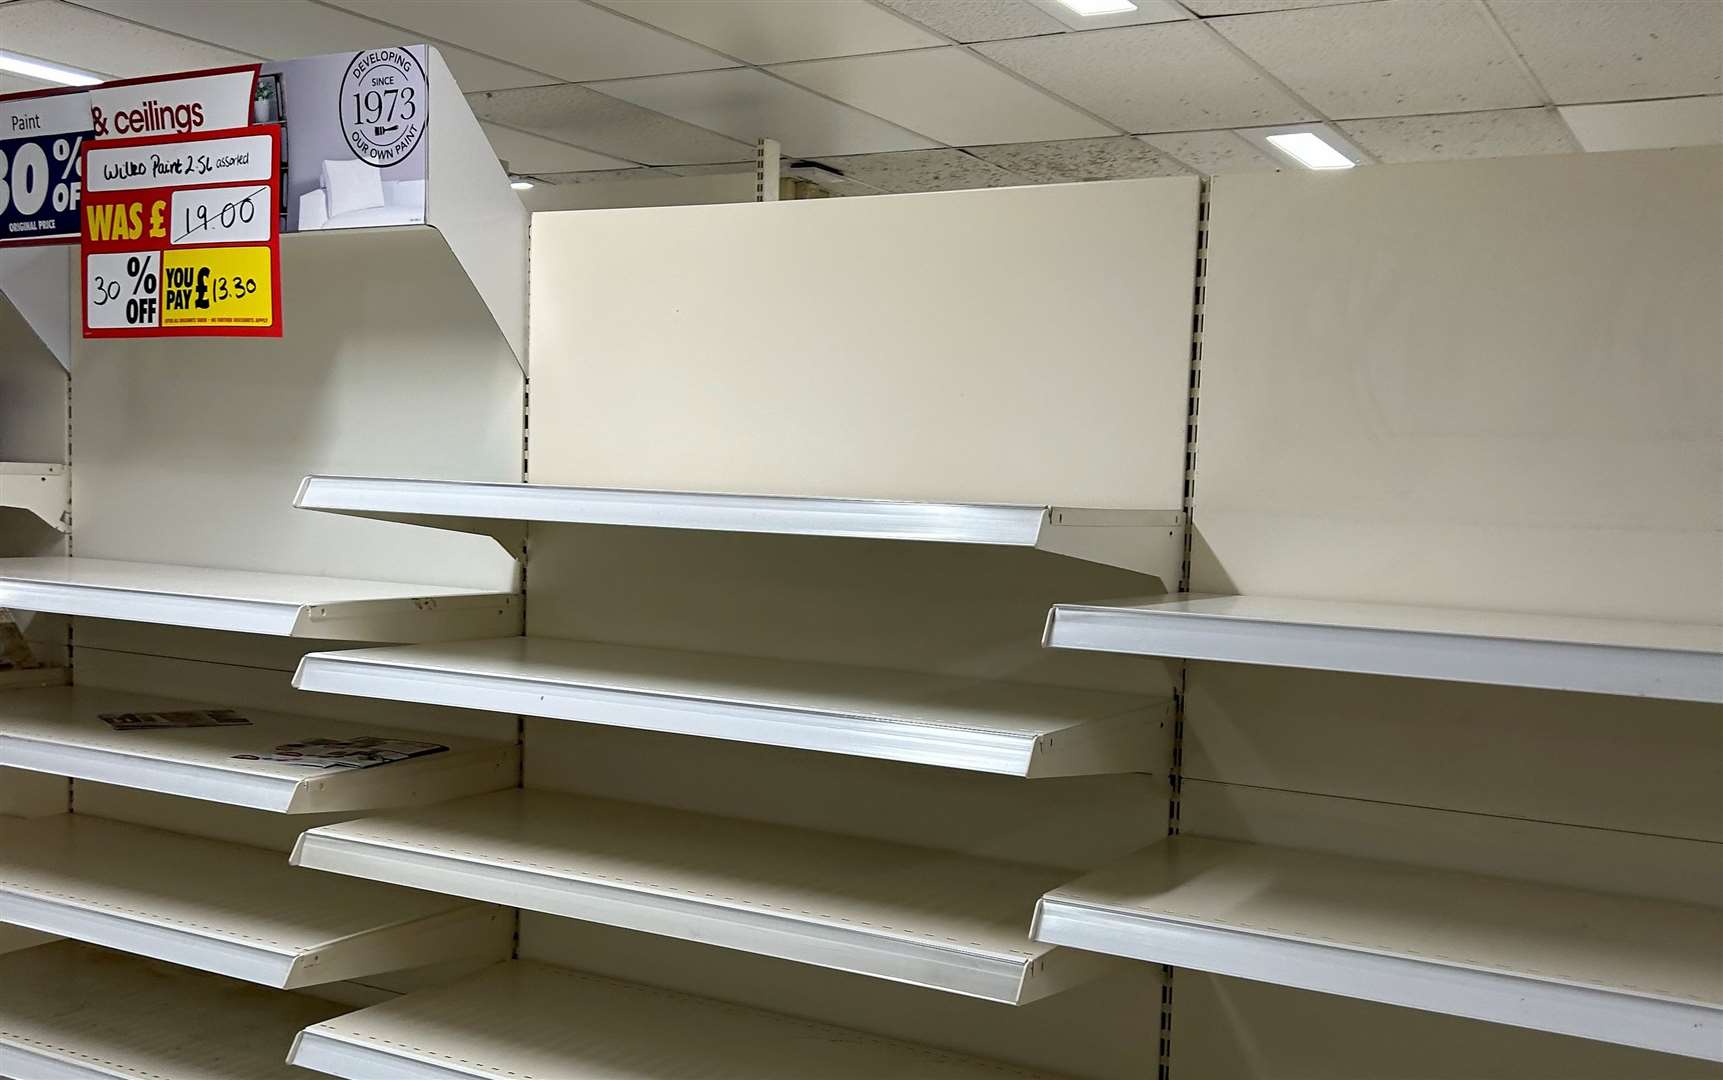 Shelves which used to be packed now are empty